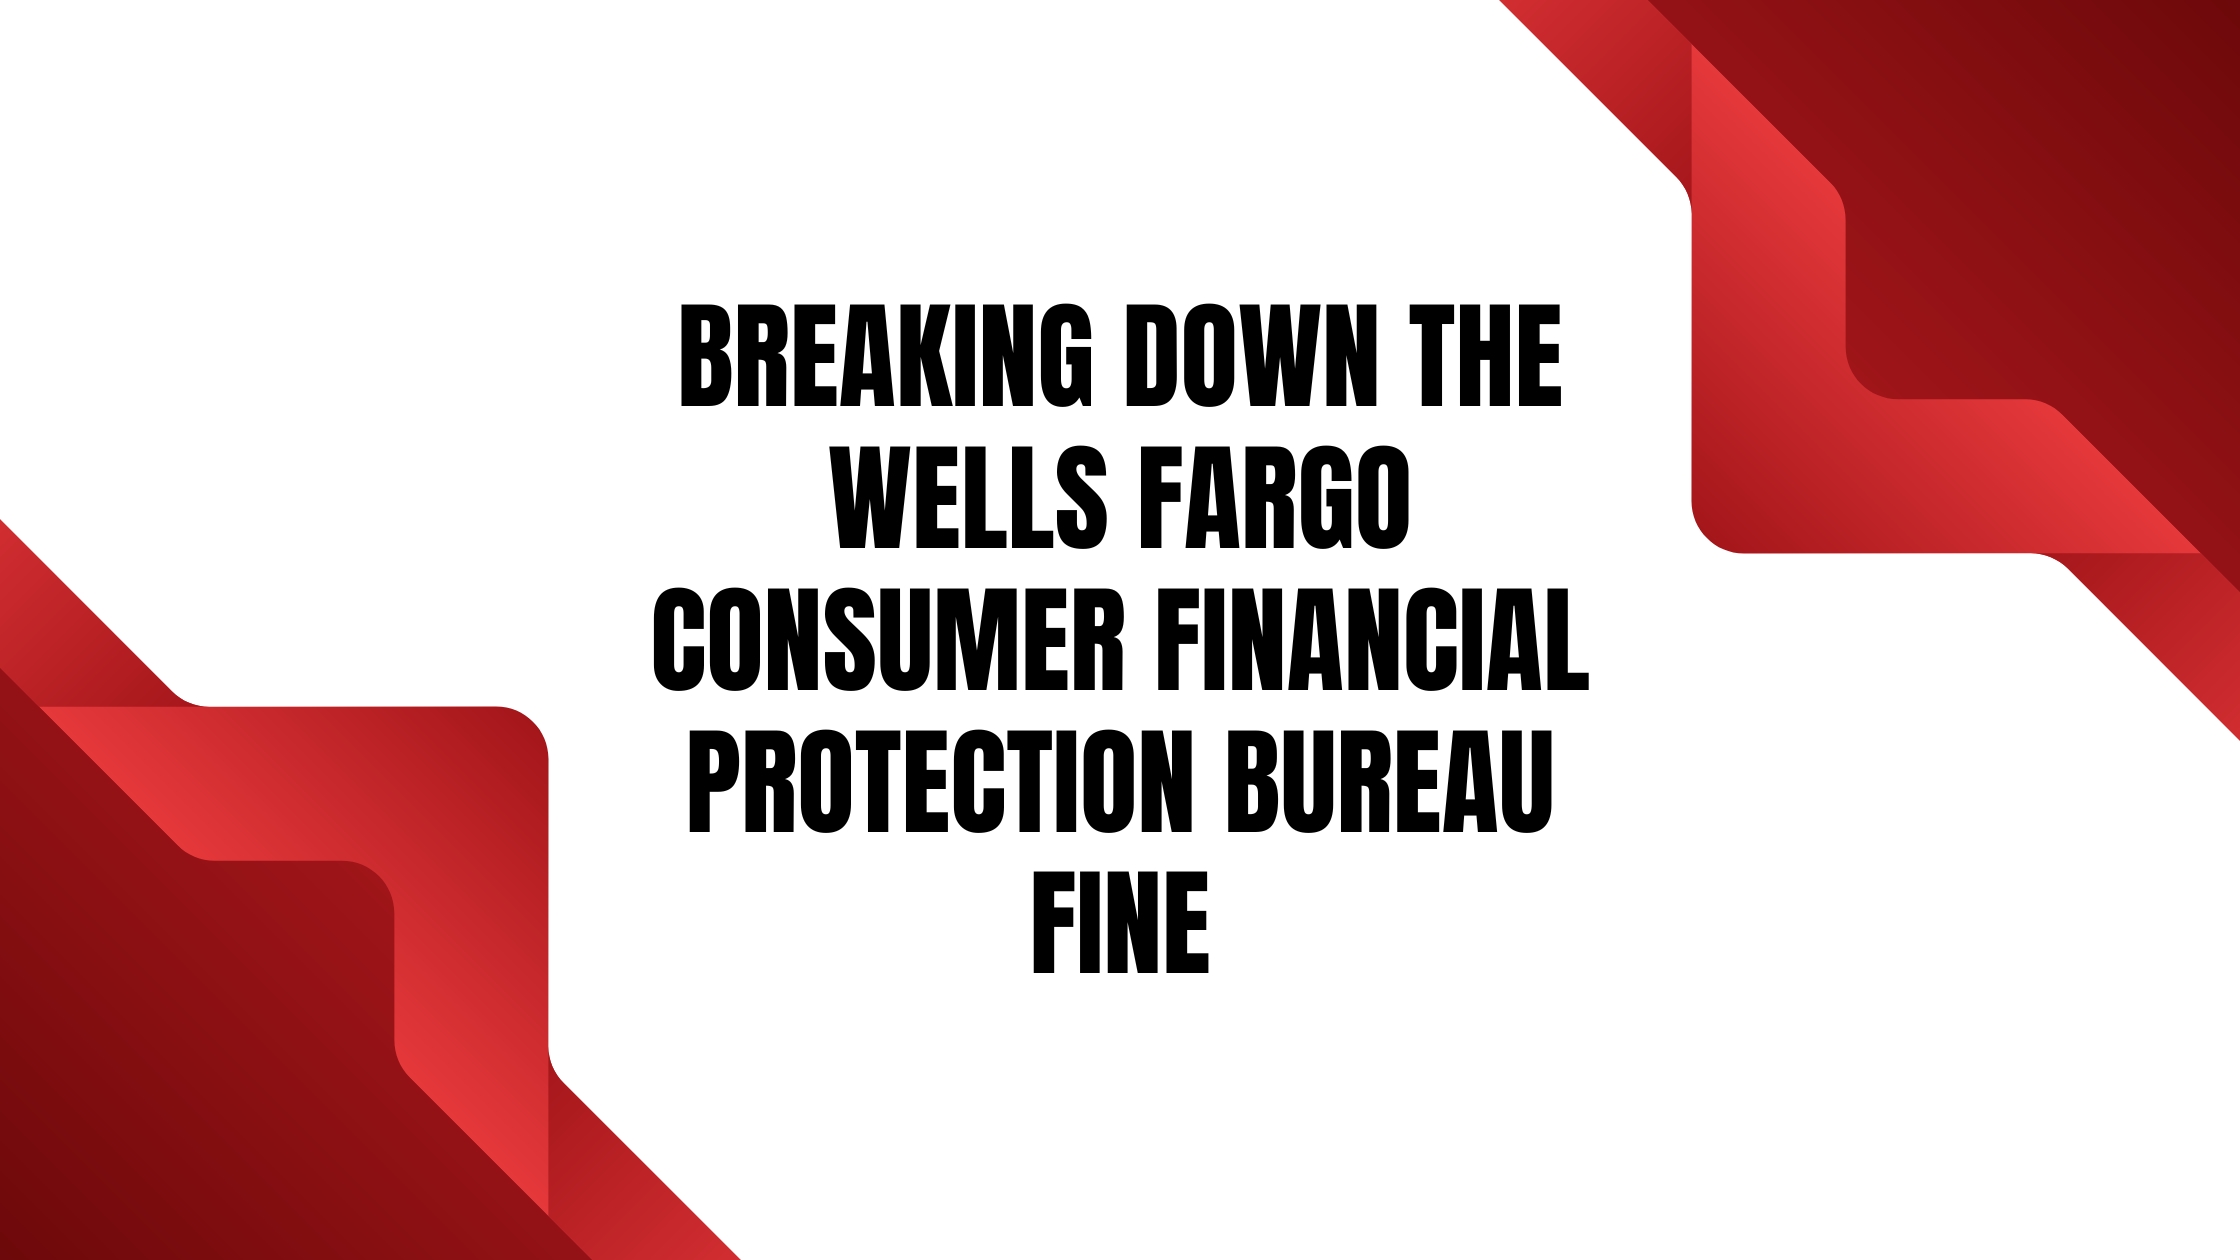 What Actions Did The Consumer Financial Protection Bureau Take With Wells Fargo Fines?